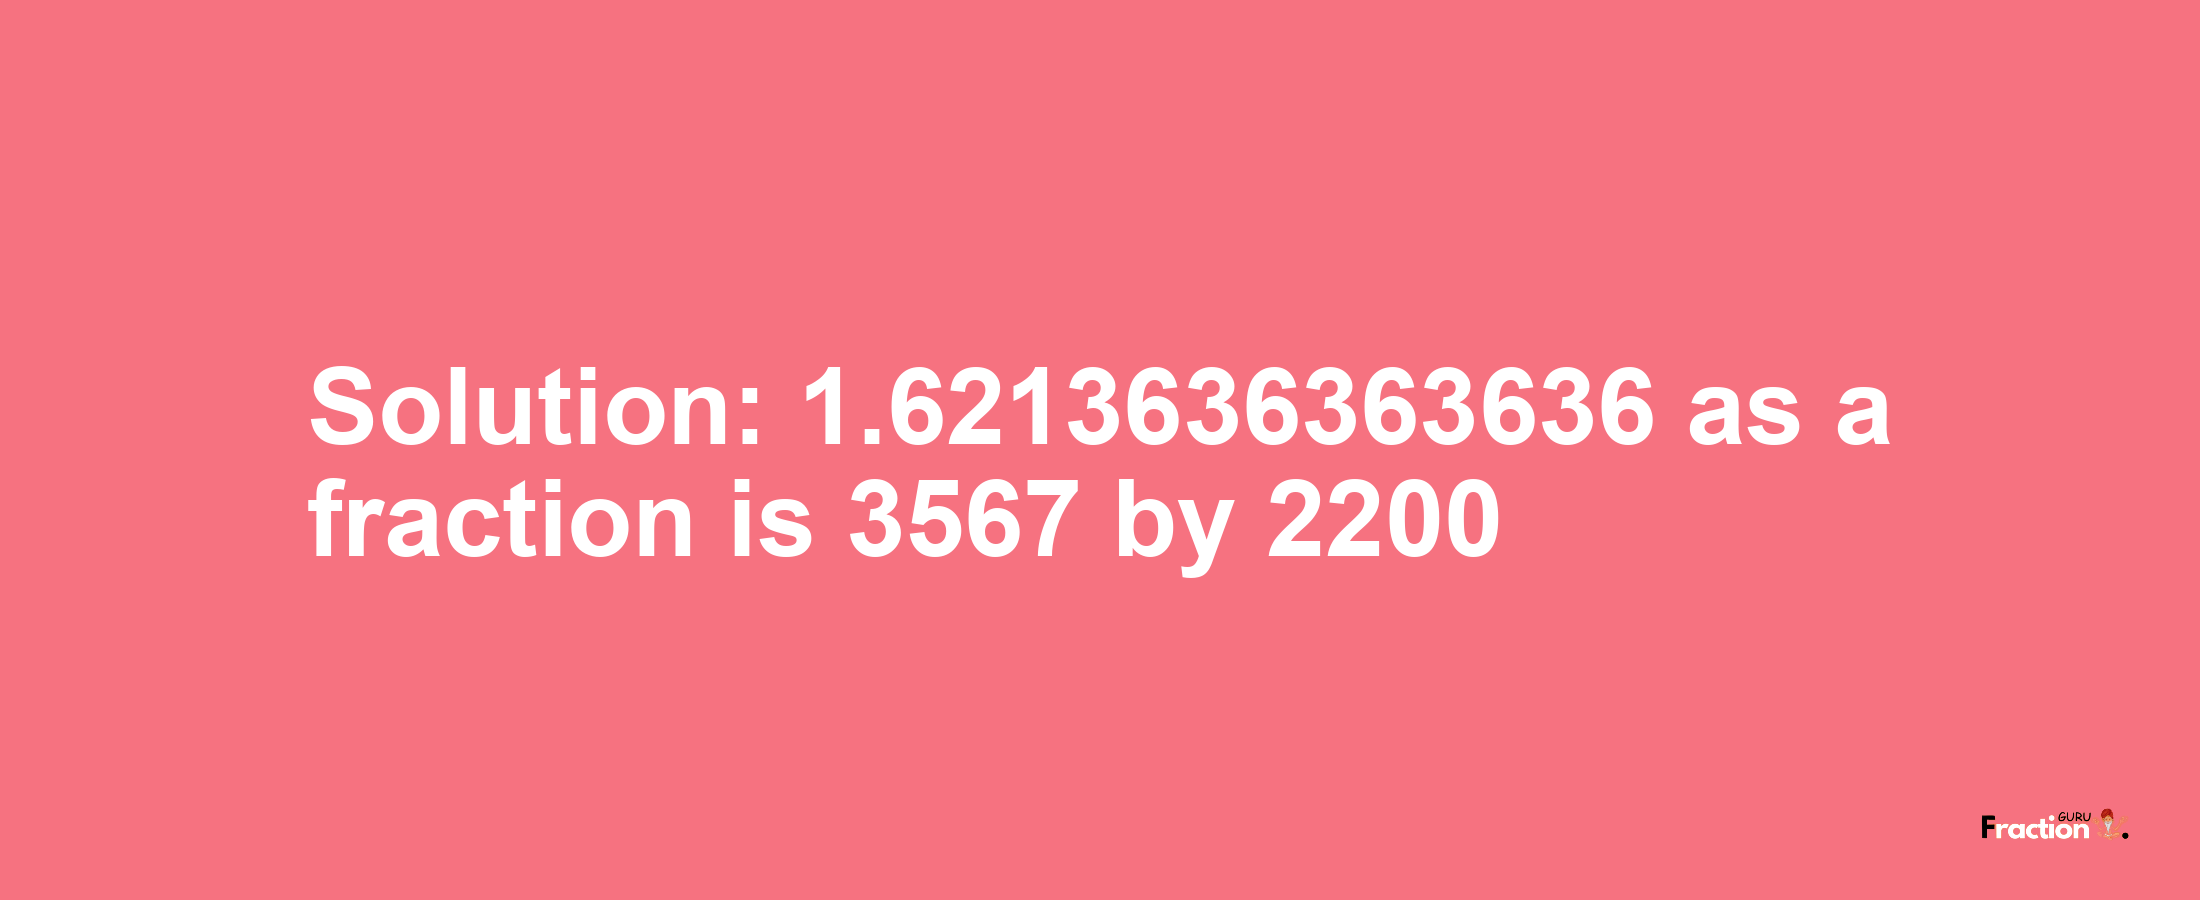 Solution:1.6213636363636 as a fraction is 3567/2200